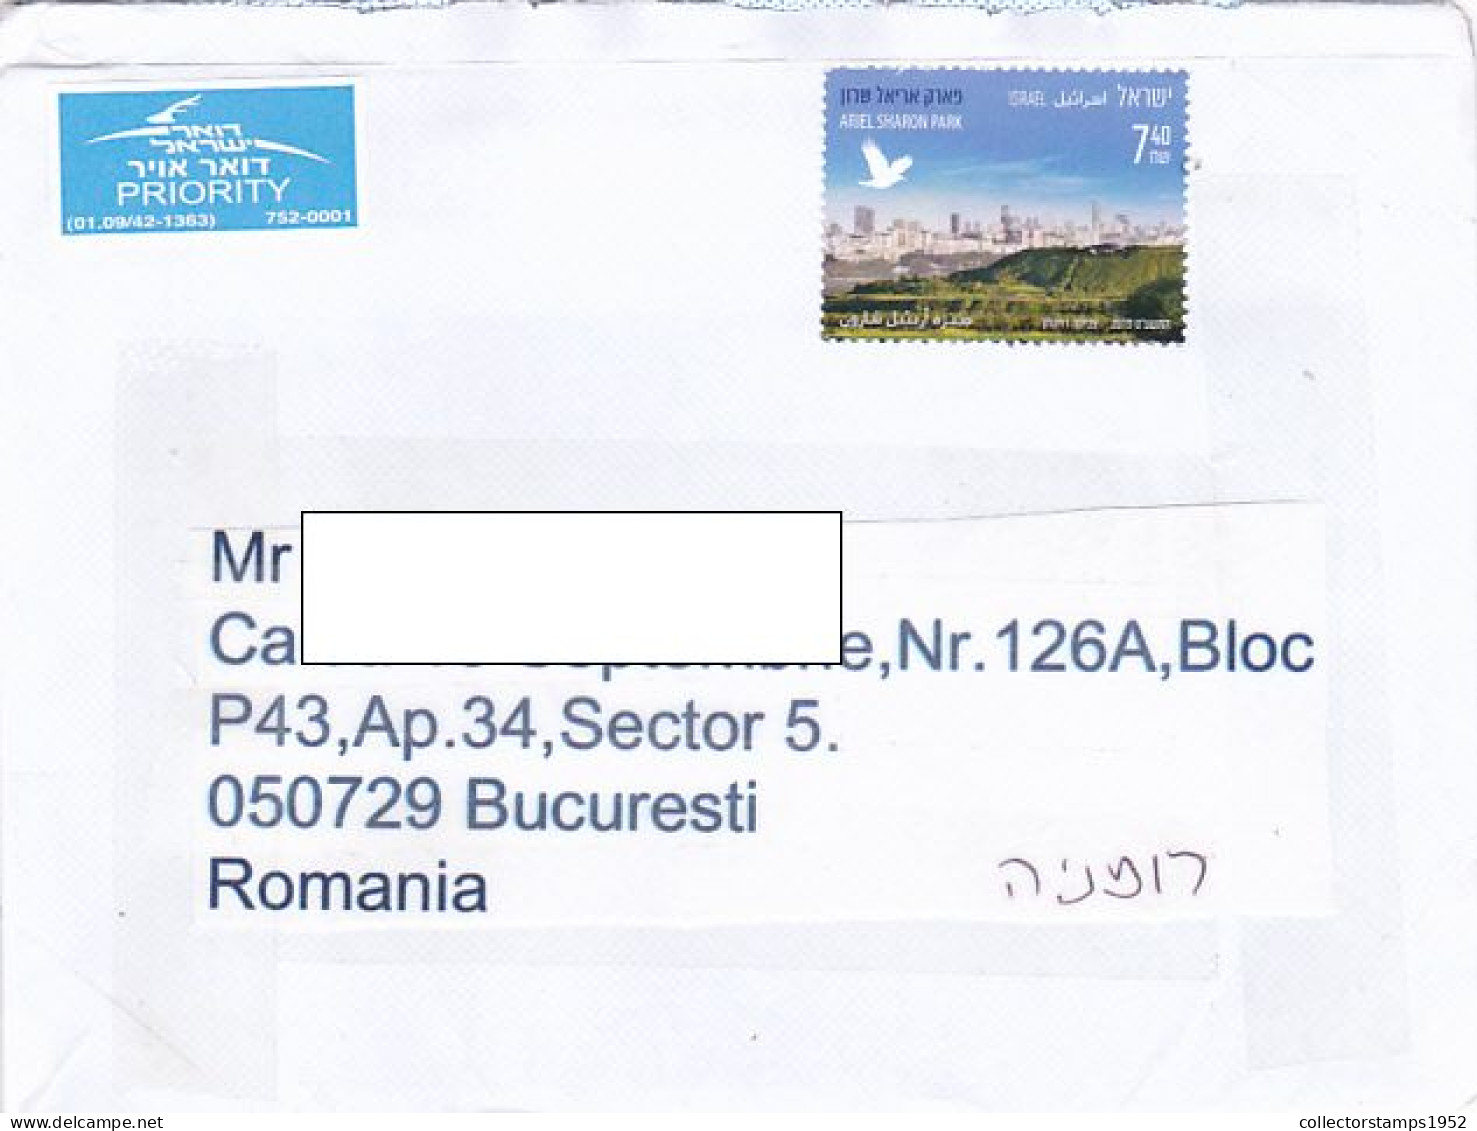 ARIEL SHARON PARK, FINE STAMPS ON COVER, 2020, ISRAEL - Lettres & Documents